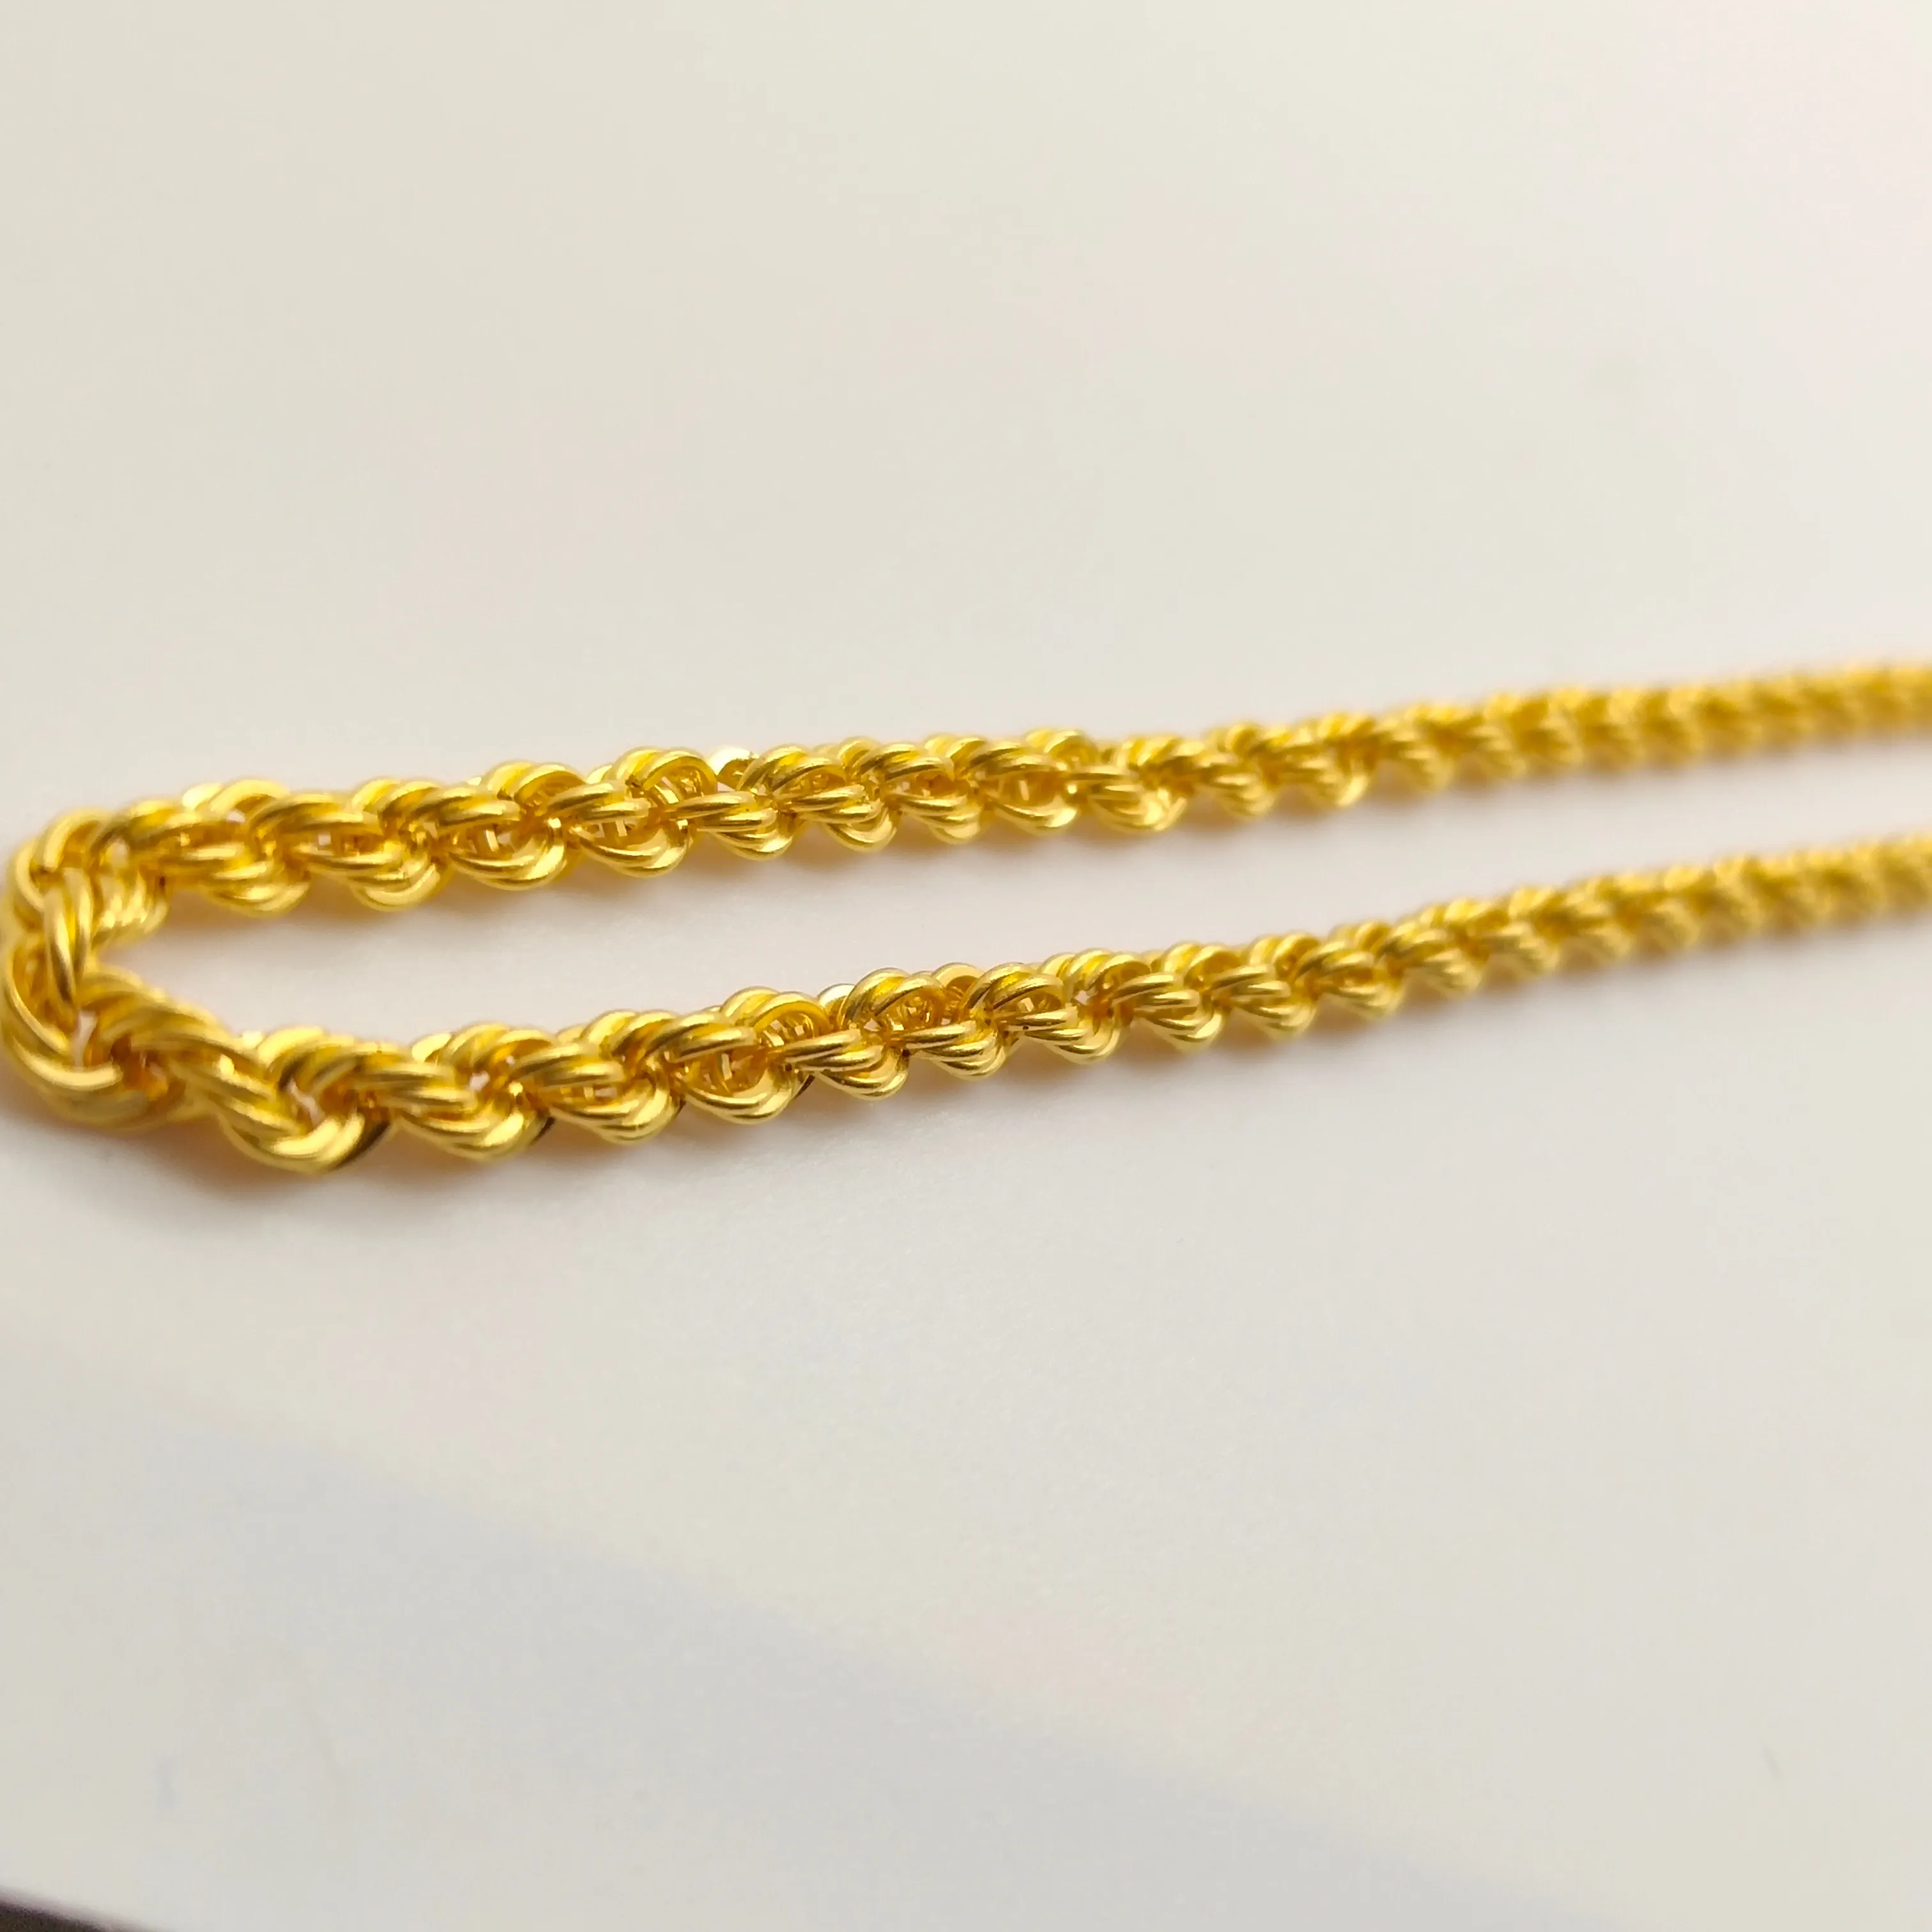 Pure Gold Hip Hop Jewelry18/20inch 3.5MM Yellow Gold Rope Chain 18K Gold Men Necklace